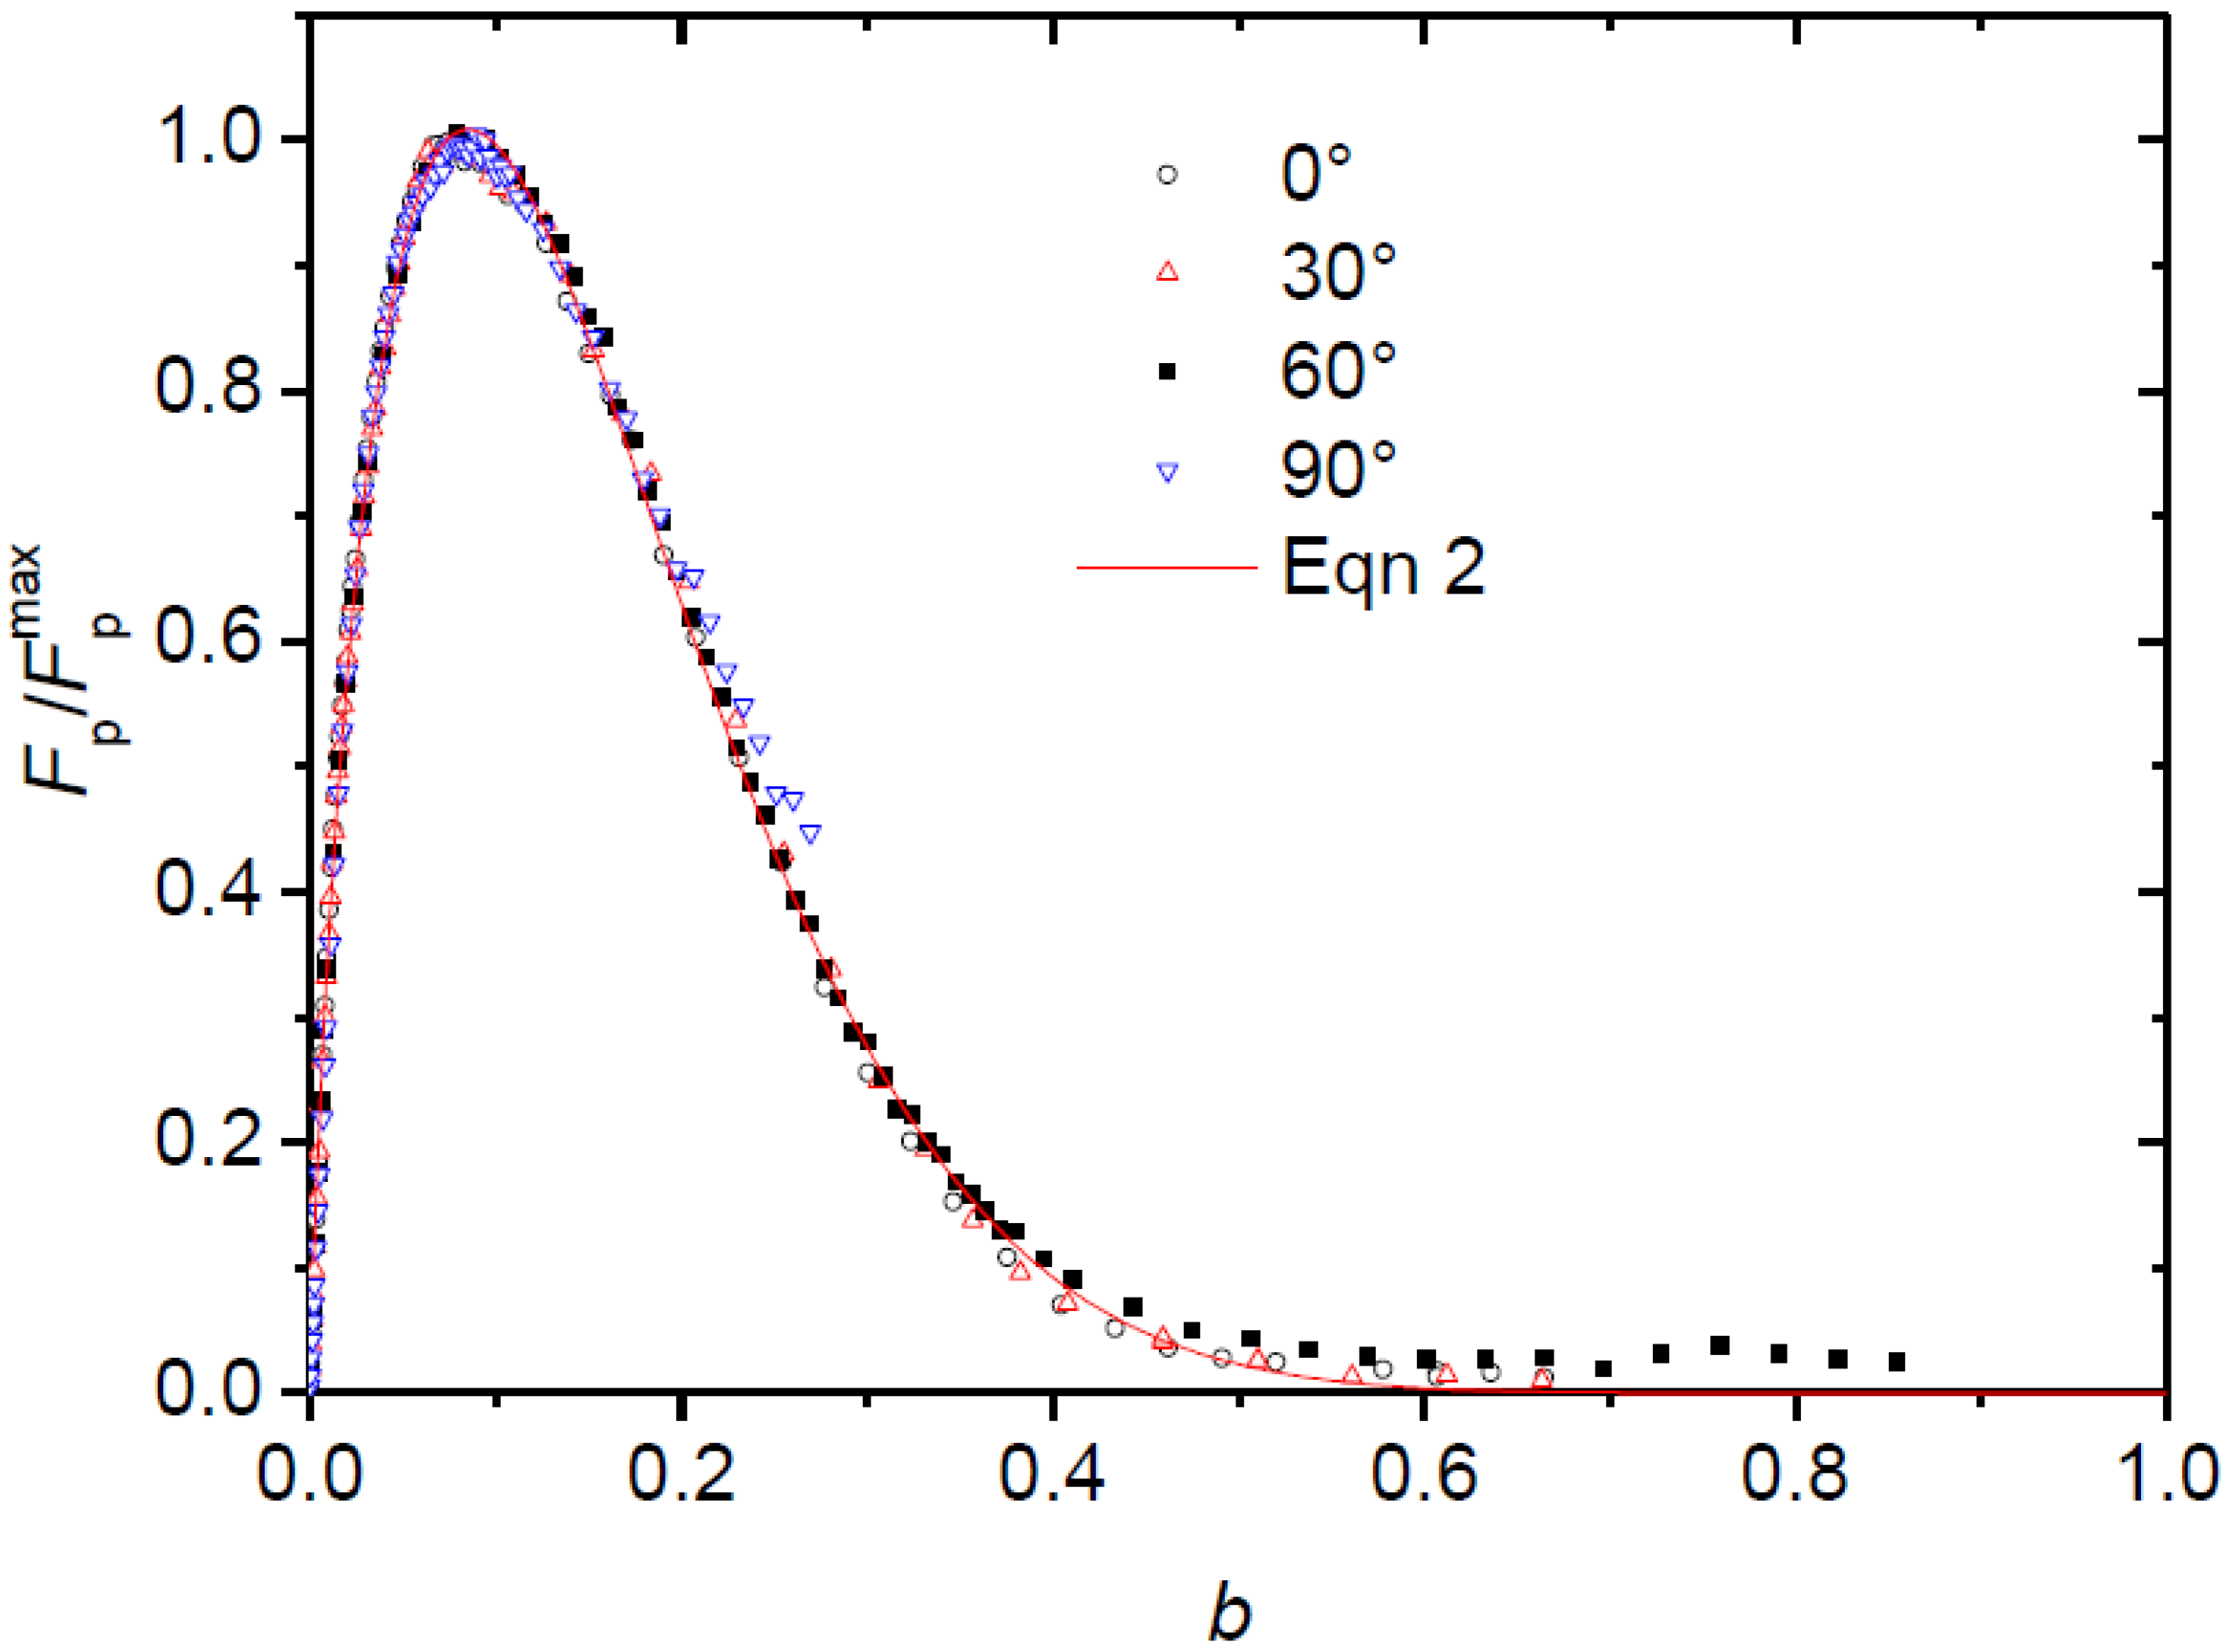 entropy maximizing distribution with absolute power constraint